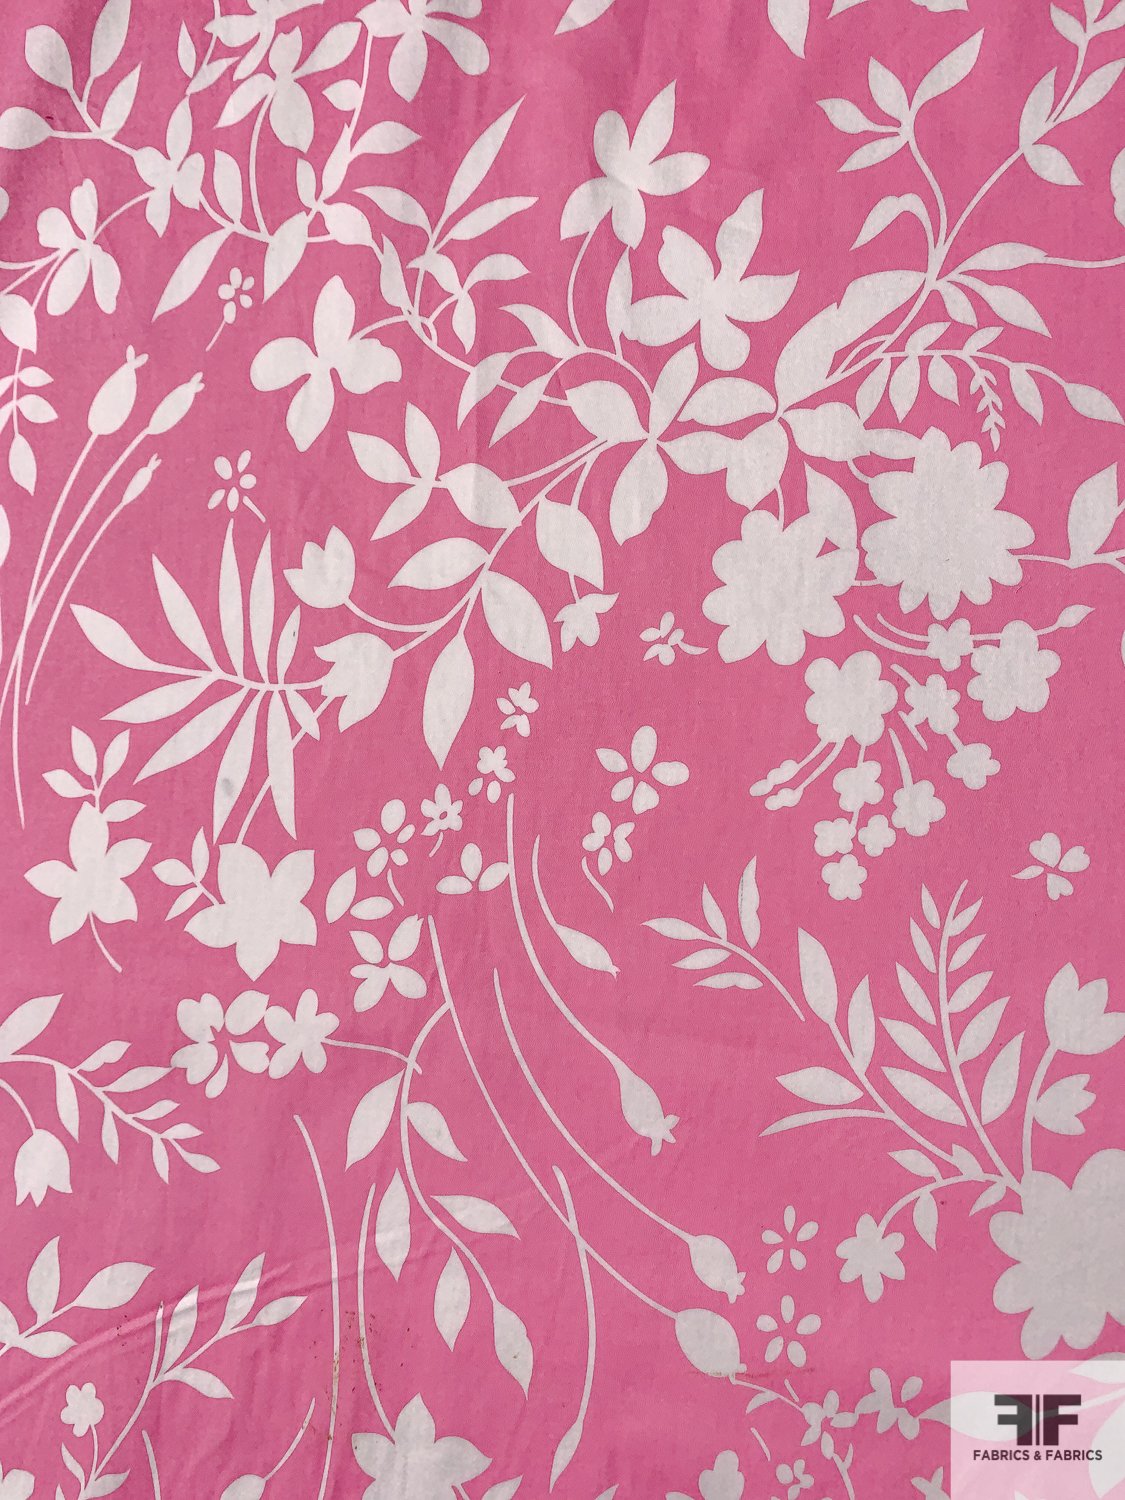 Floral Silhouette Printed Stretch Cotton Sateen - Bubblegum Pink / White